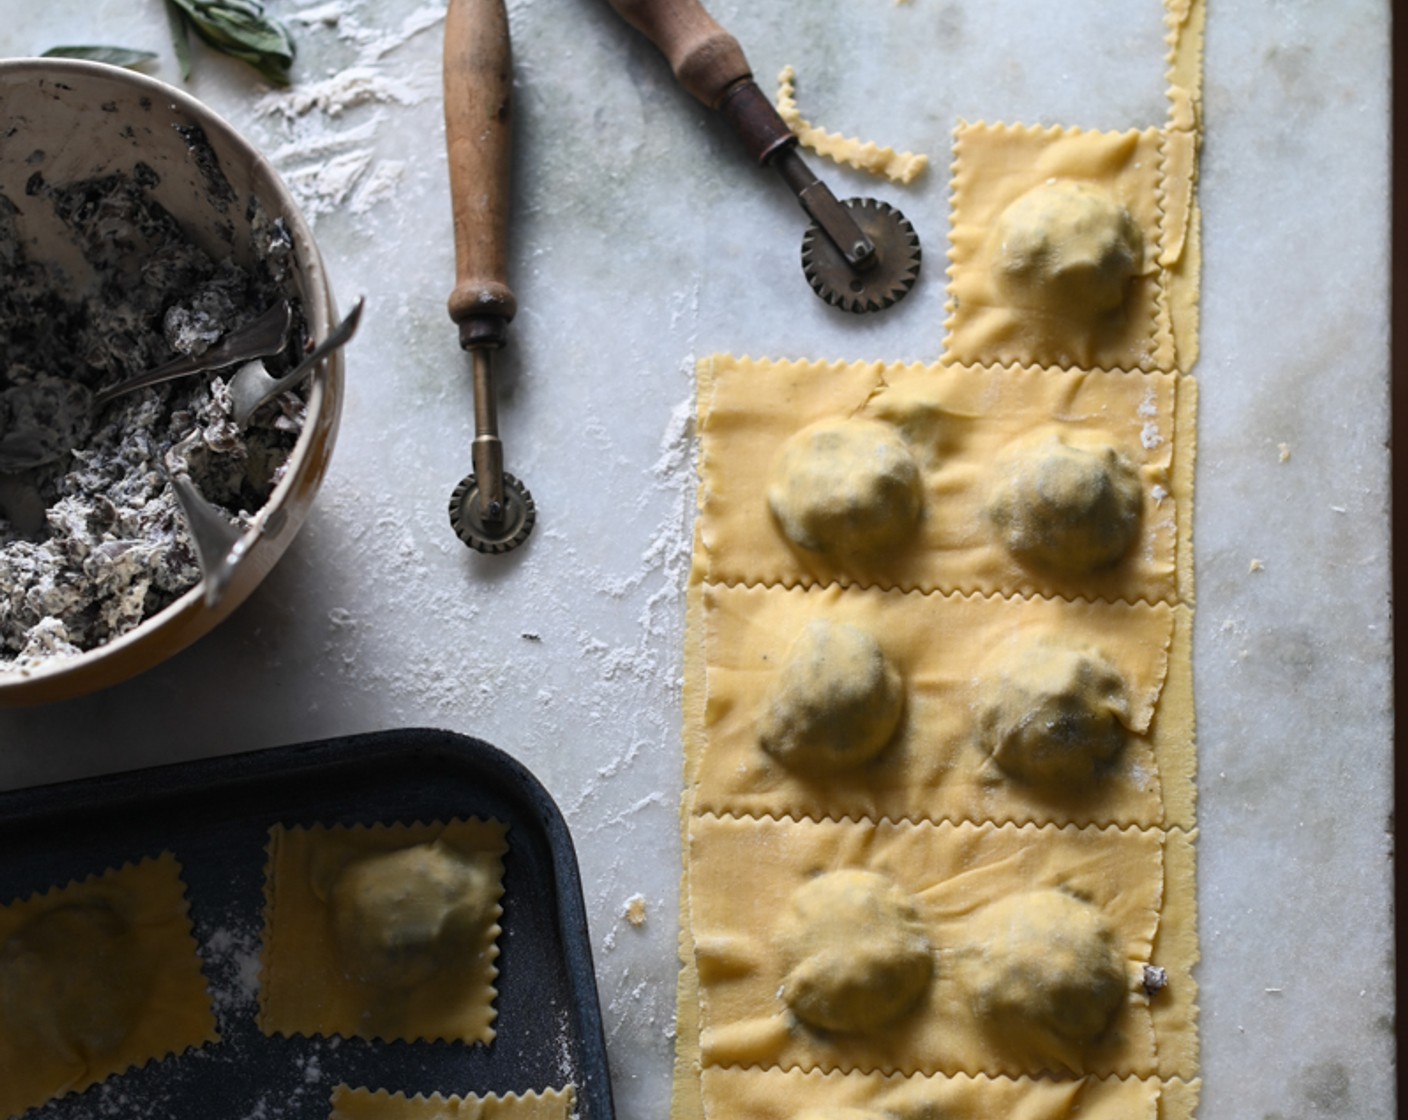 step 12 Seal the edges of the ravioli pockets with a brush of water and if desired, use a ravioli cutter to press out small pockets. Set the cut ravioli on a lined baking sheet sprinkled with semolina until ready to cook.